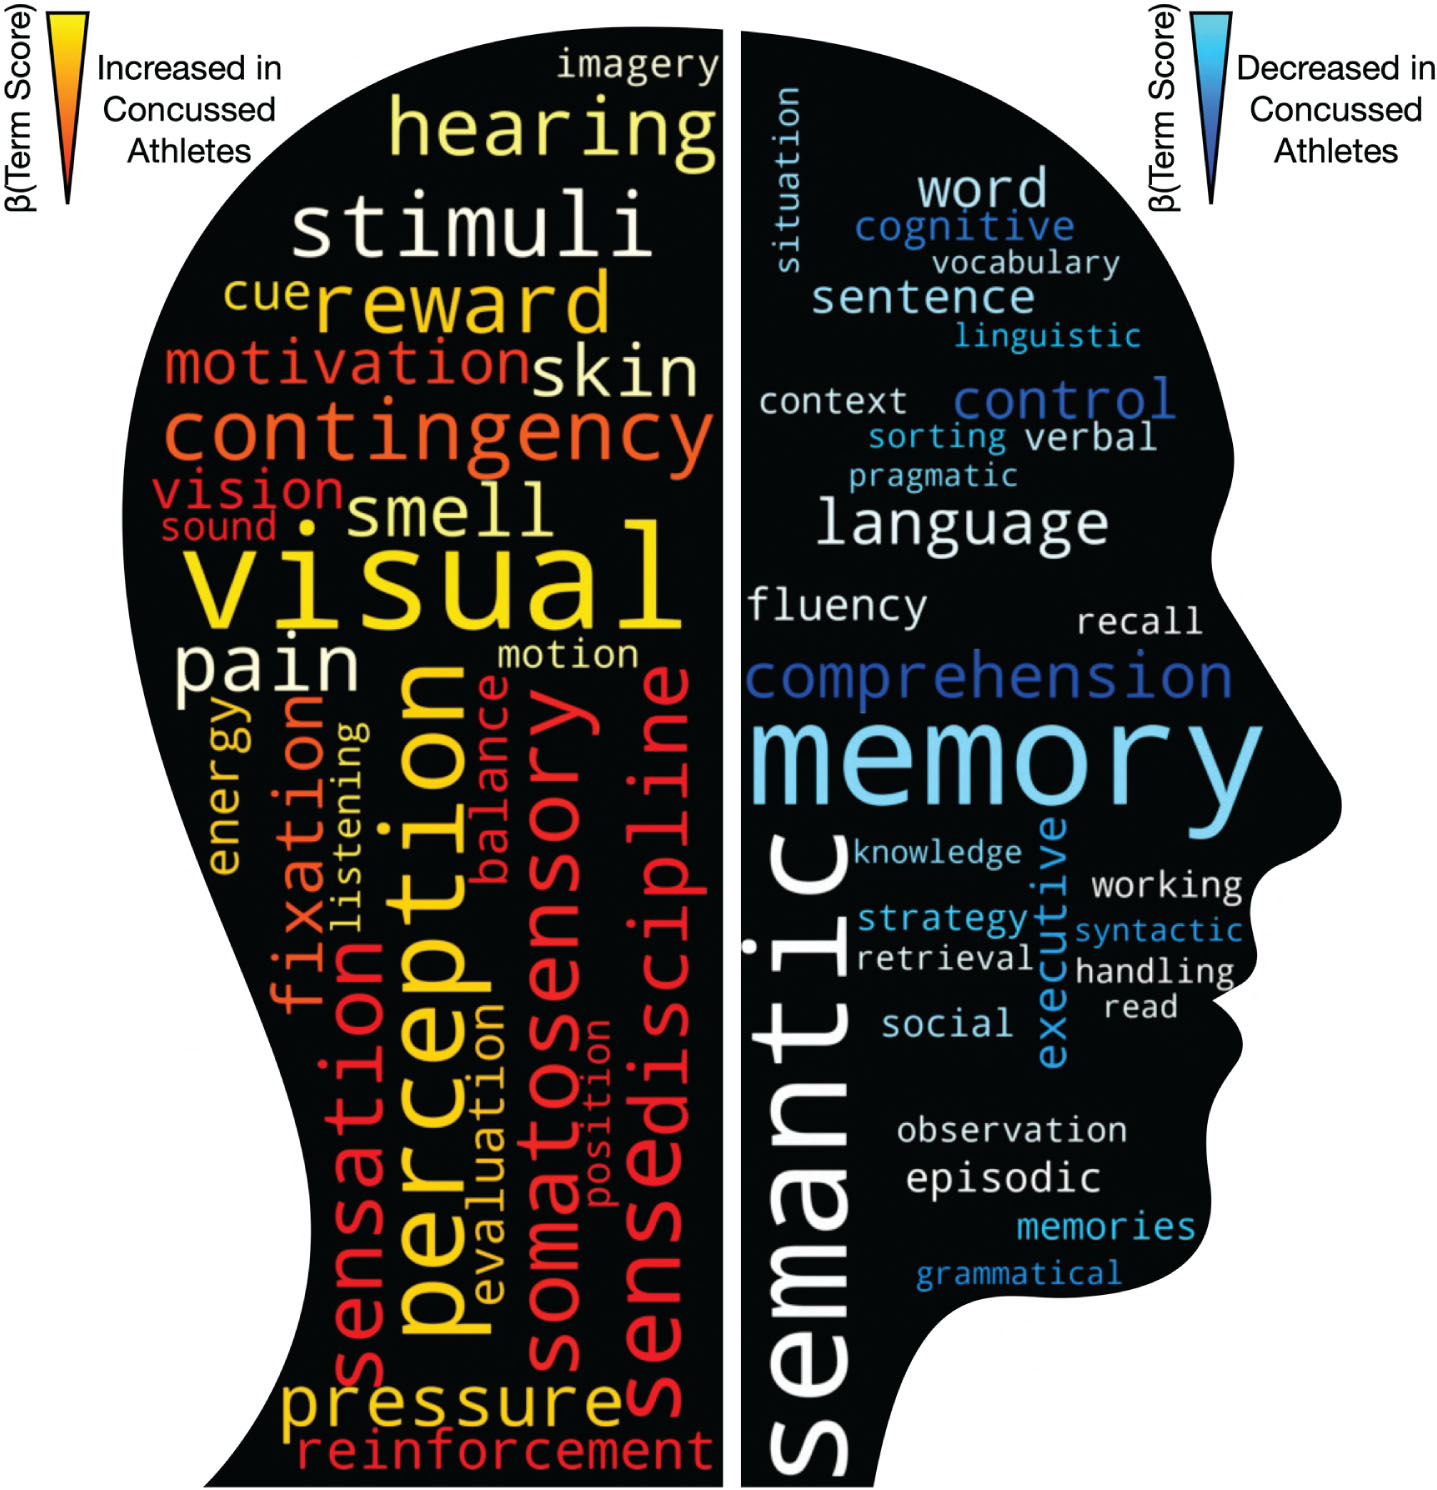 Word-cloud representations of meta-analytic function analysis, derived from 13,459 neuroimaging studies encompassing 5,144 activation pattern terms. Text increasingly red-orange-yellow are those functions putatively enhanced within the athlete group, compared to controls. Reciprocally, text increasingly blue-light blue are those functions putatively attenuated within the athlete group.